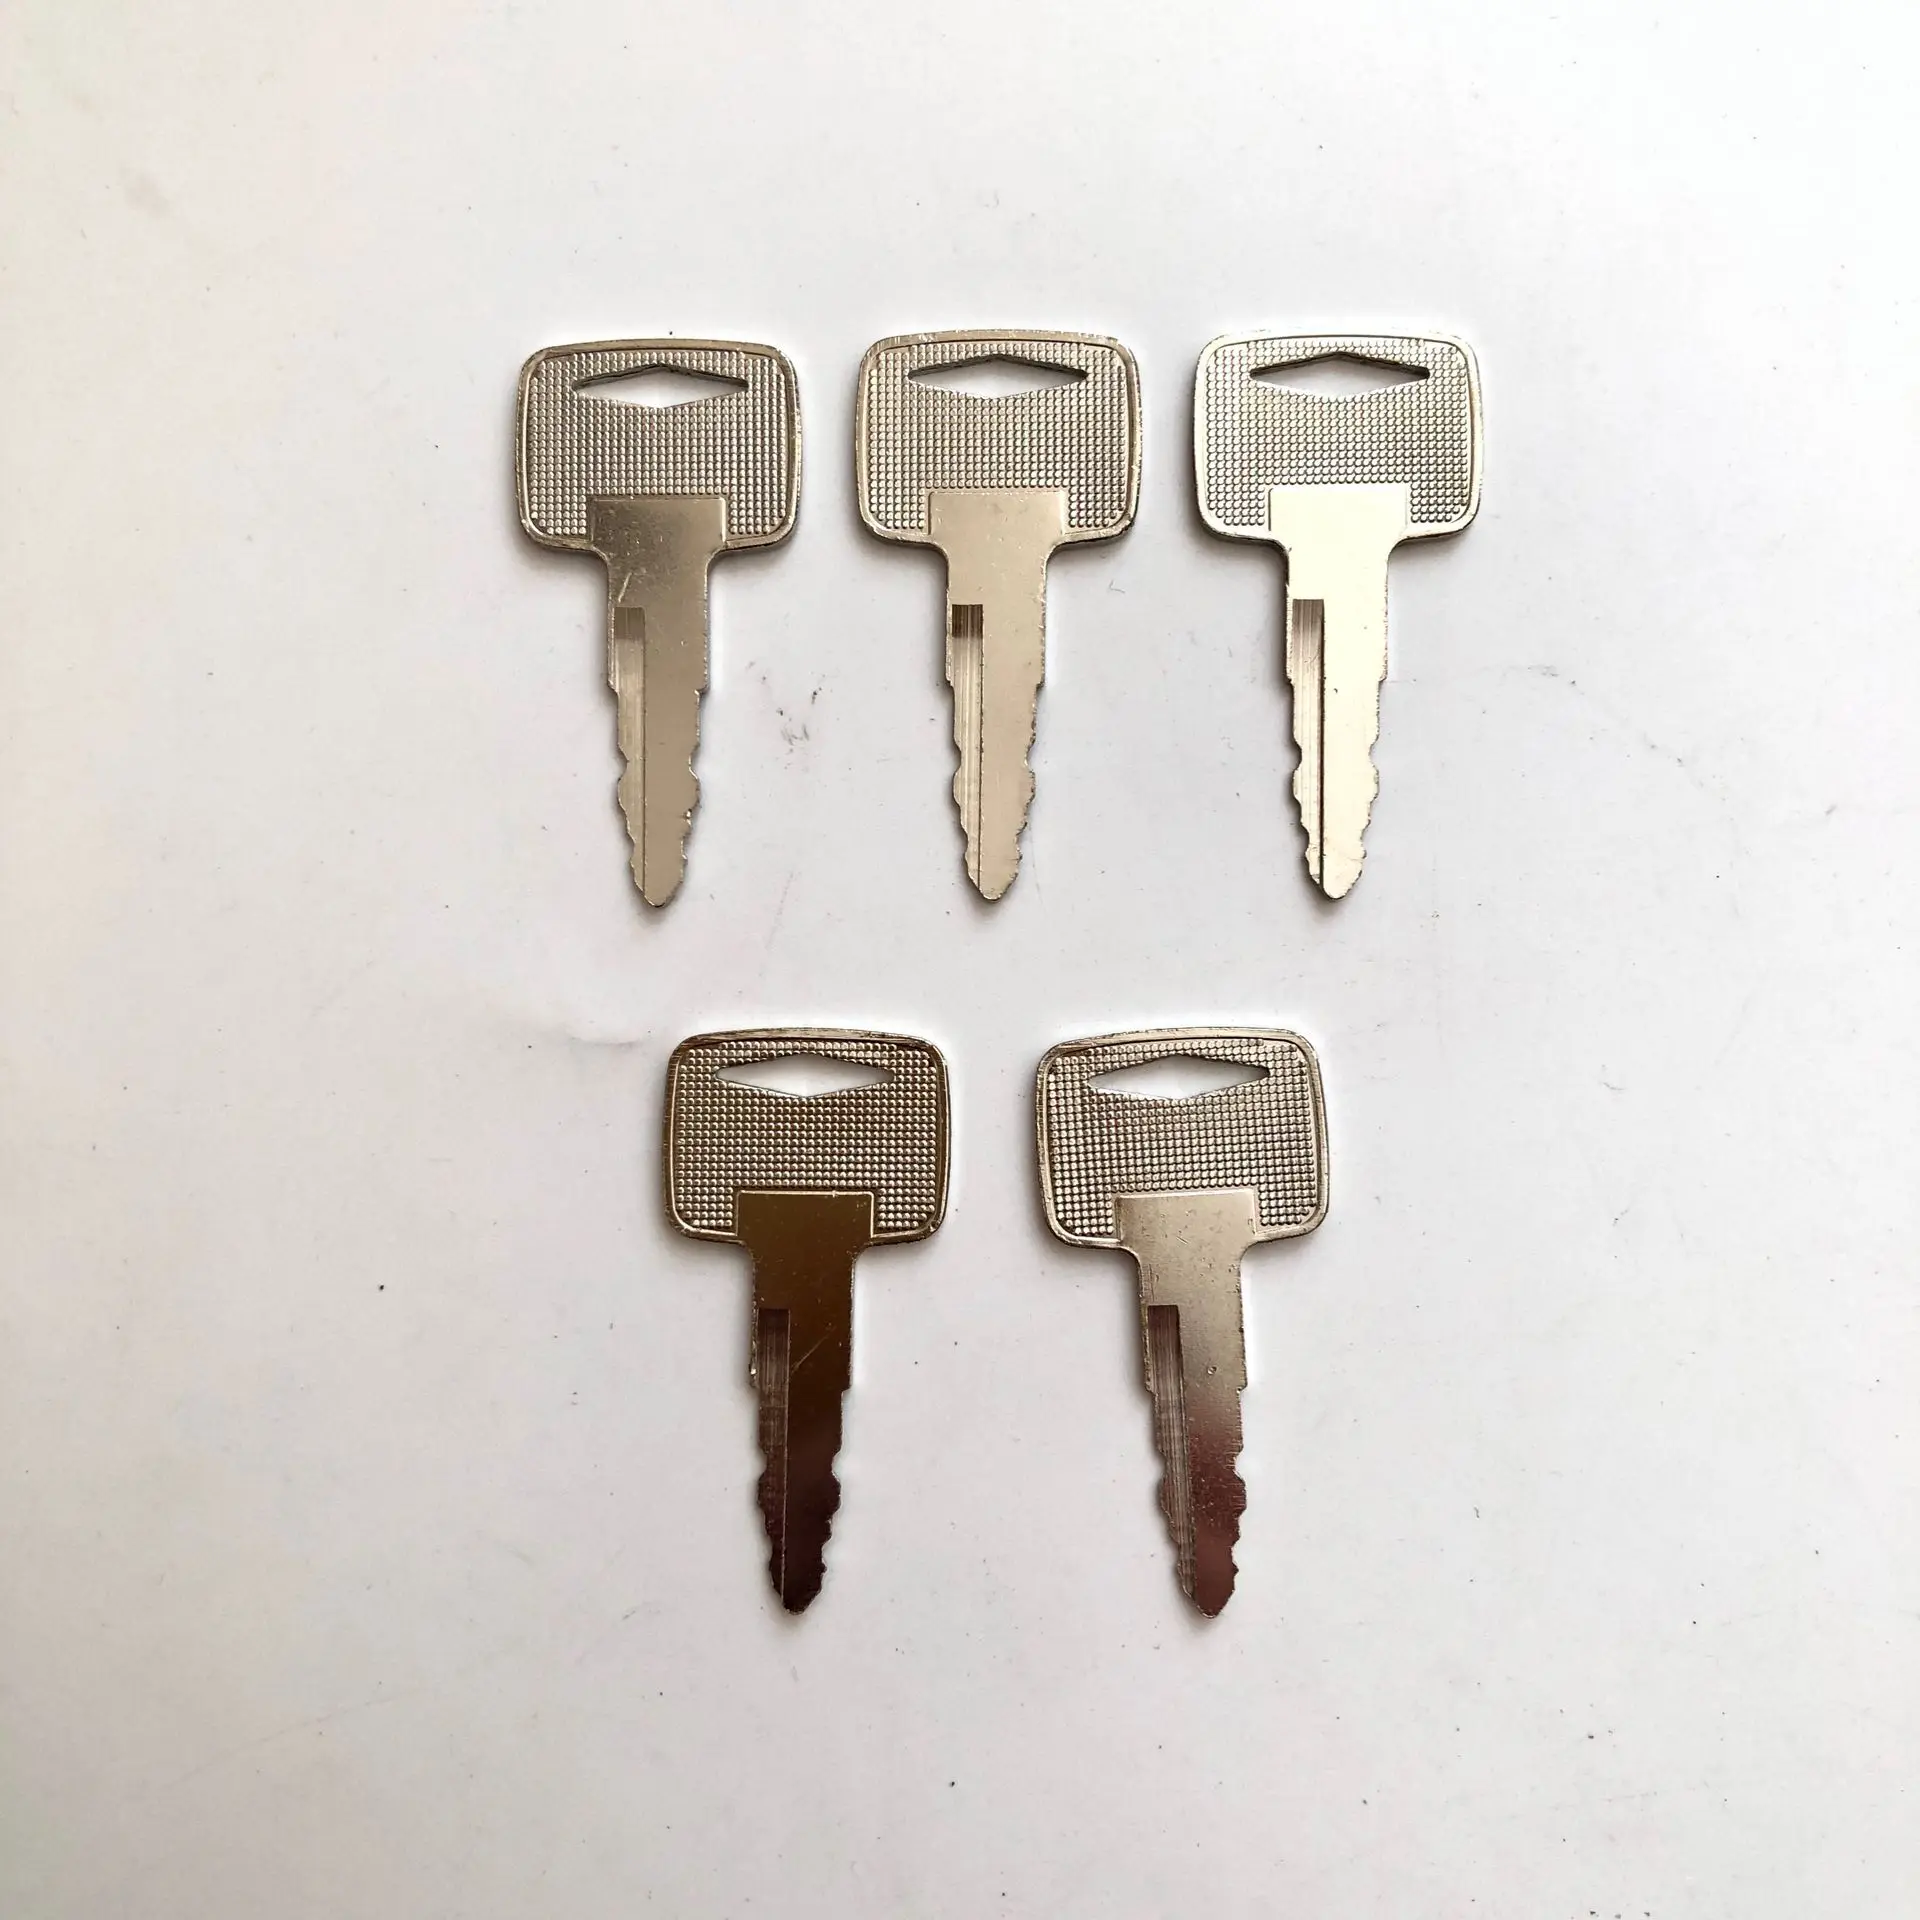 

5PCS A5160 Ignition Key 91A07-01910 For Mitsubishi Caterpillar Forklift